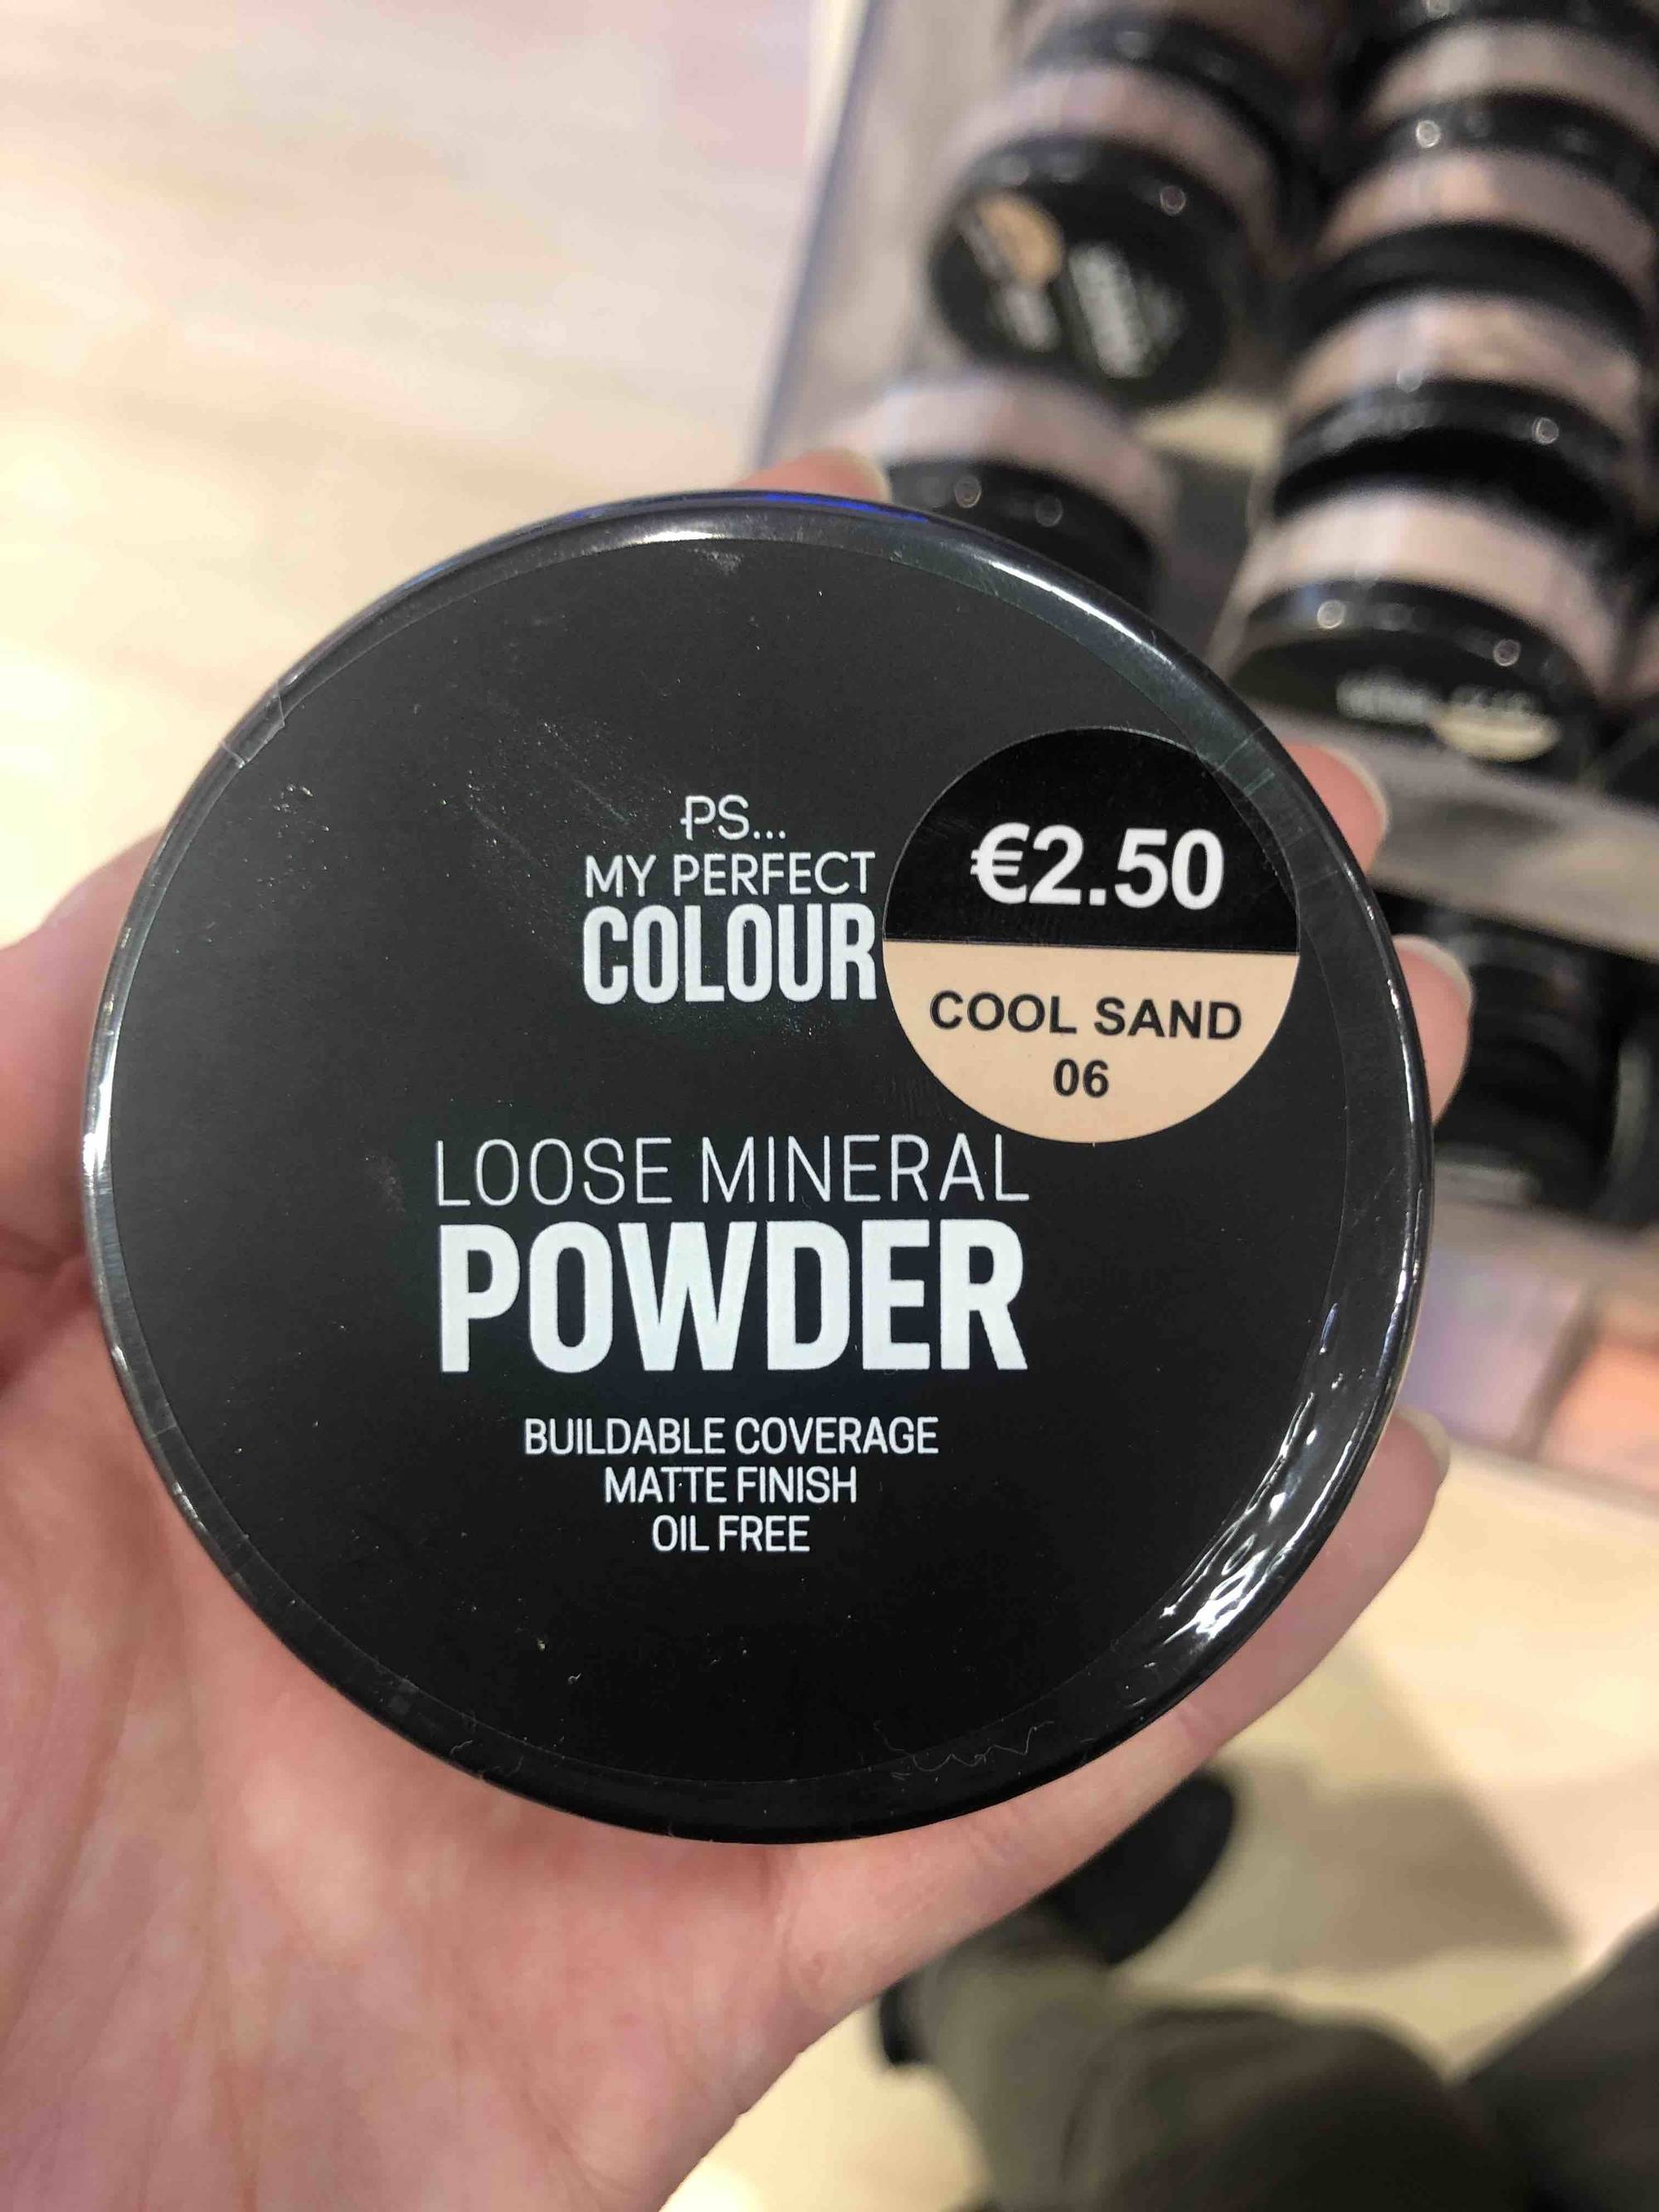 PRIMARK - My perfect colour - Loose mineral powder 06 cool sand